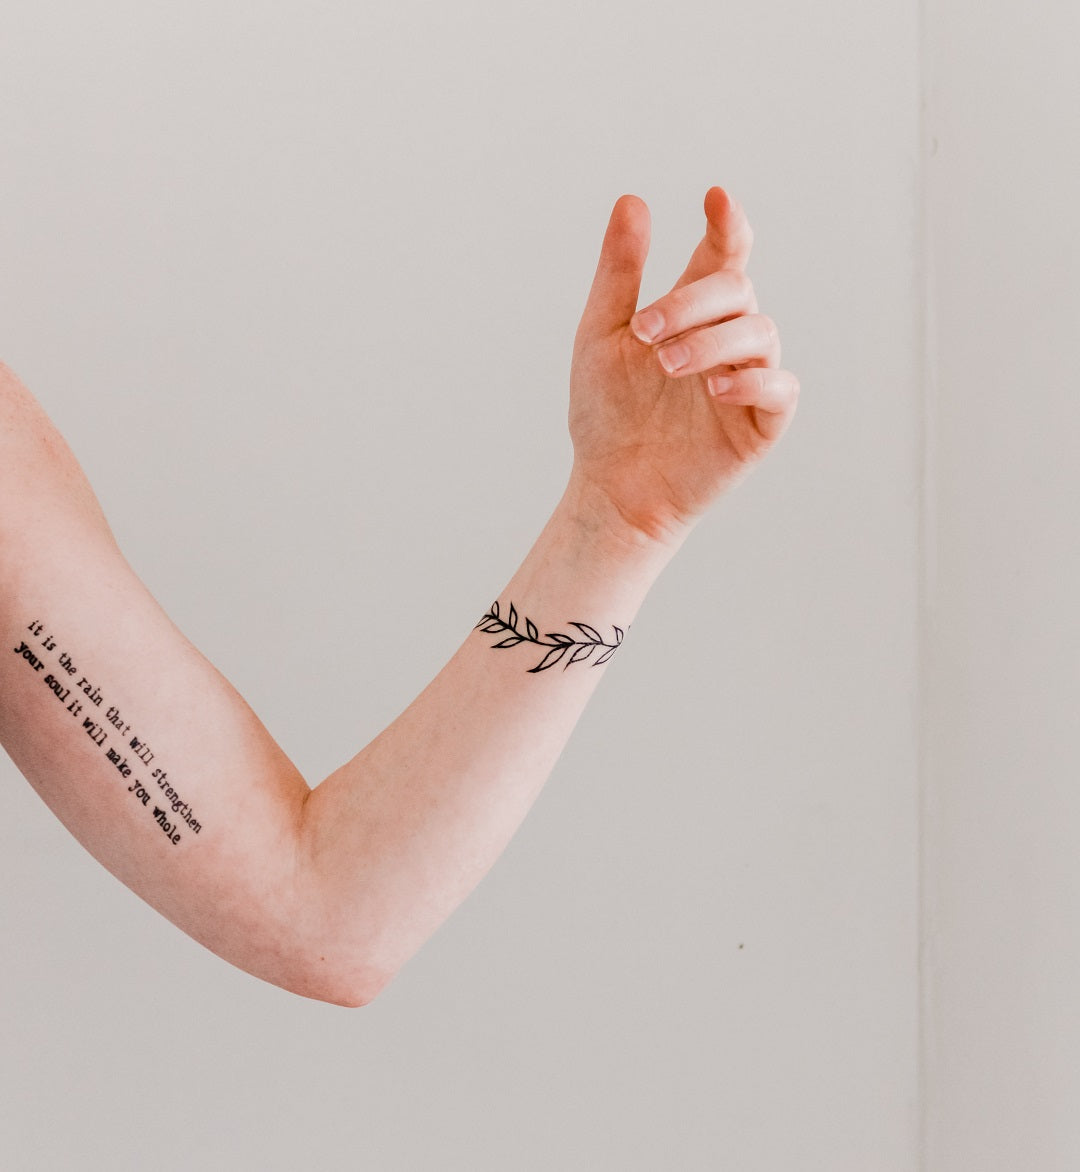 How To Choose The Best Font For Your Tattoo – Stories and Ink